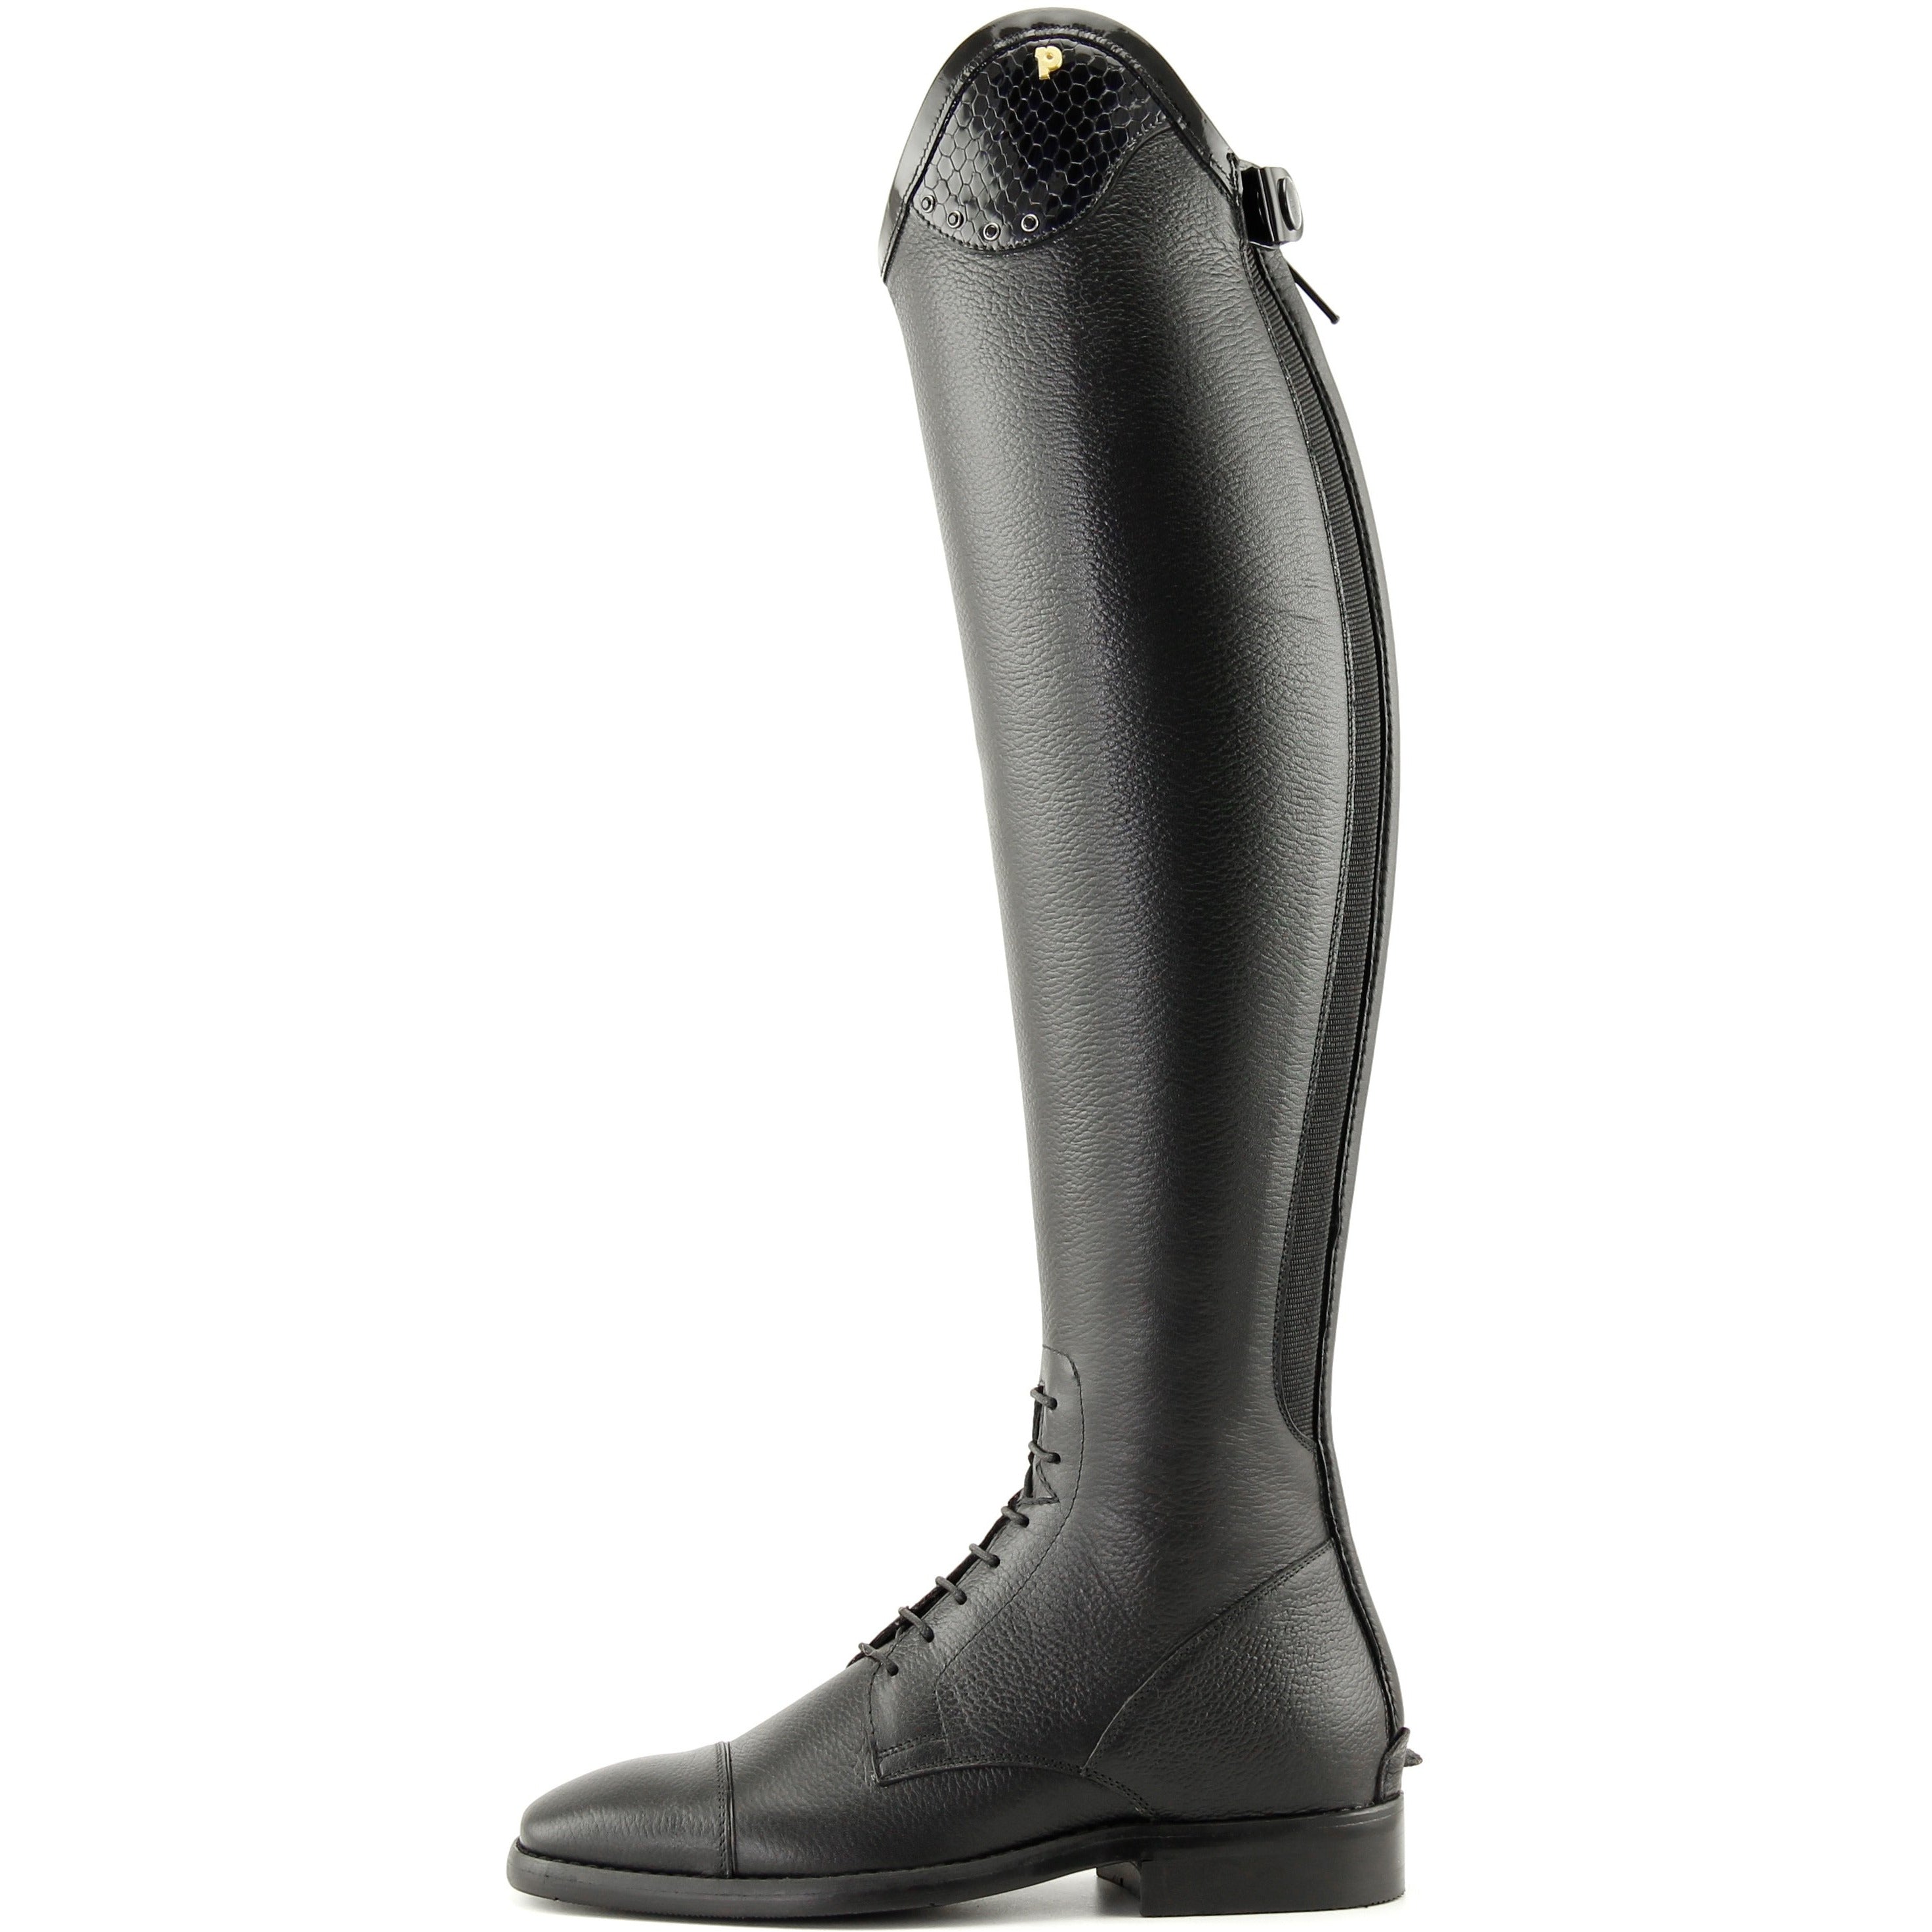 Petrie Luca Boot - Black - we have some stock but most sizes are to order